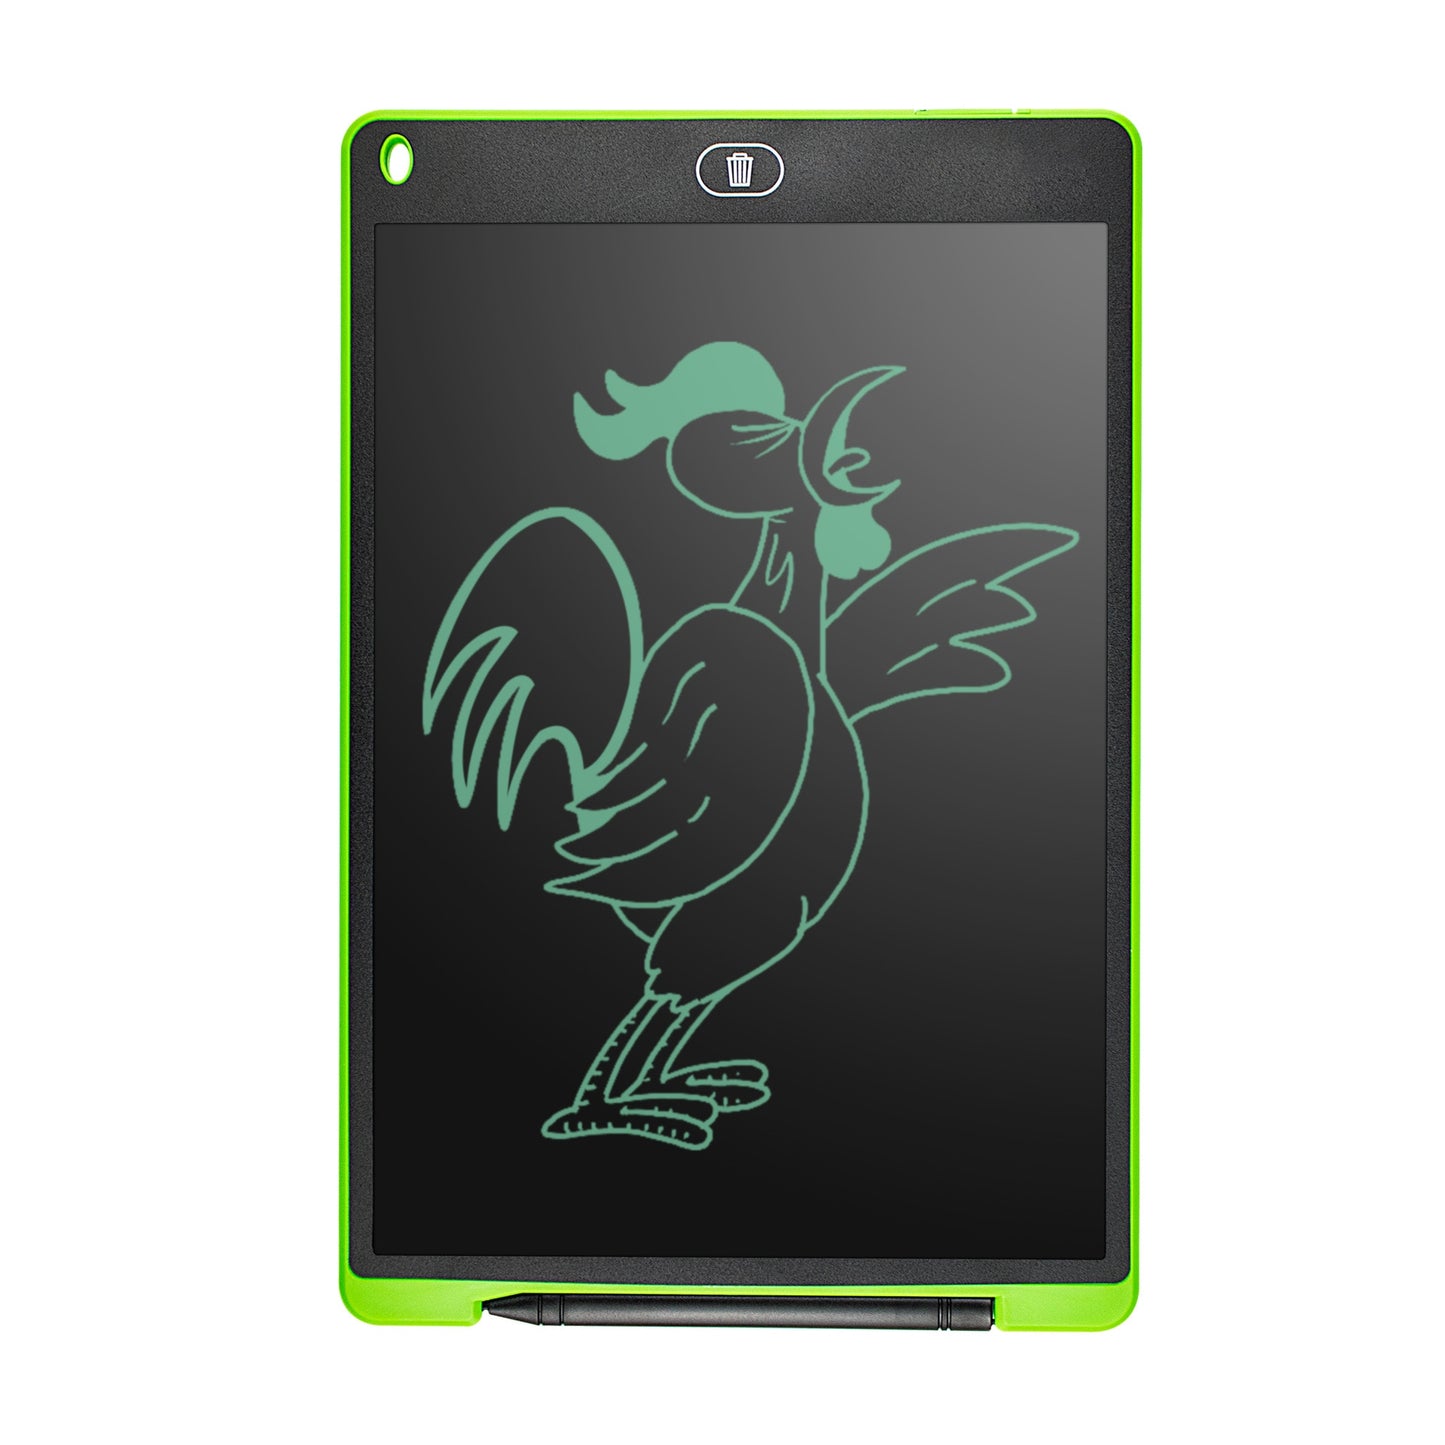 LCD Drawing Tablet for Kids: Unleash their Imagination